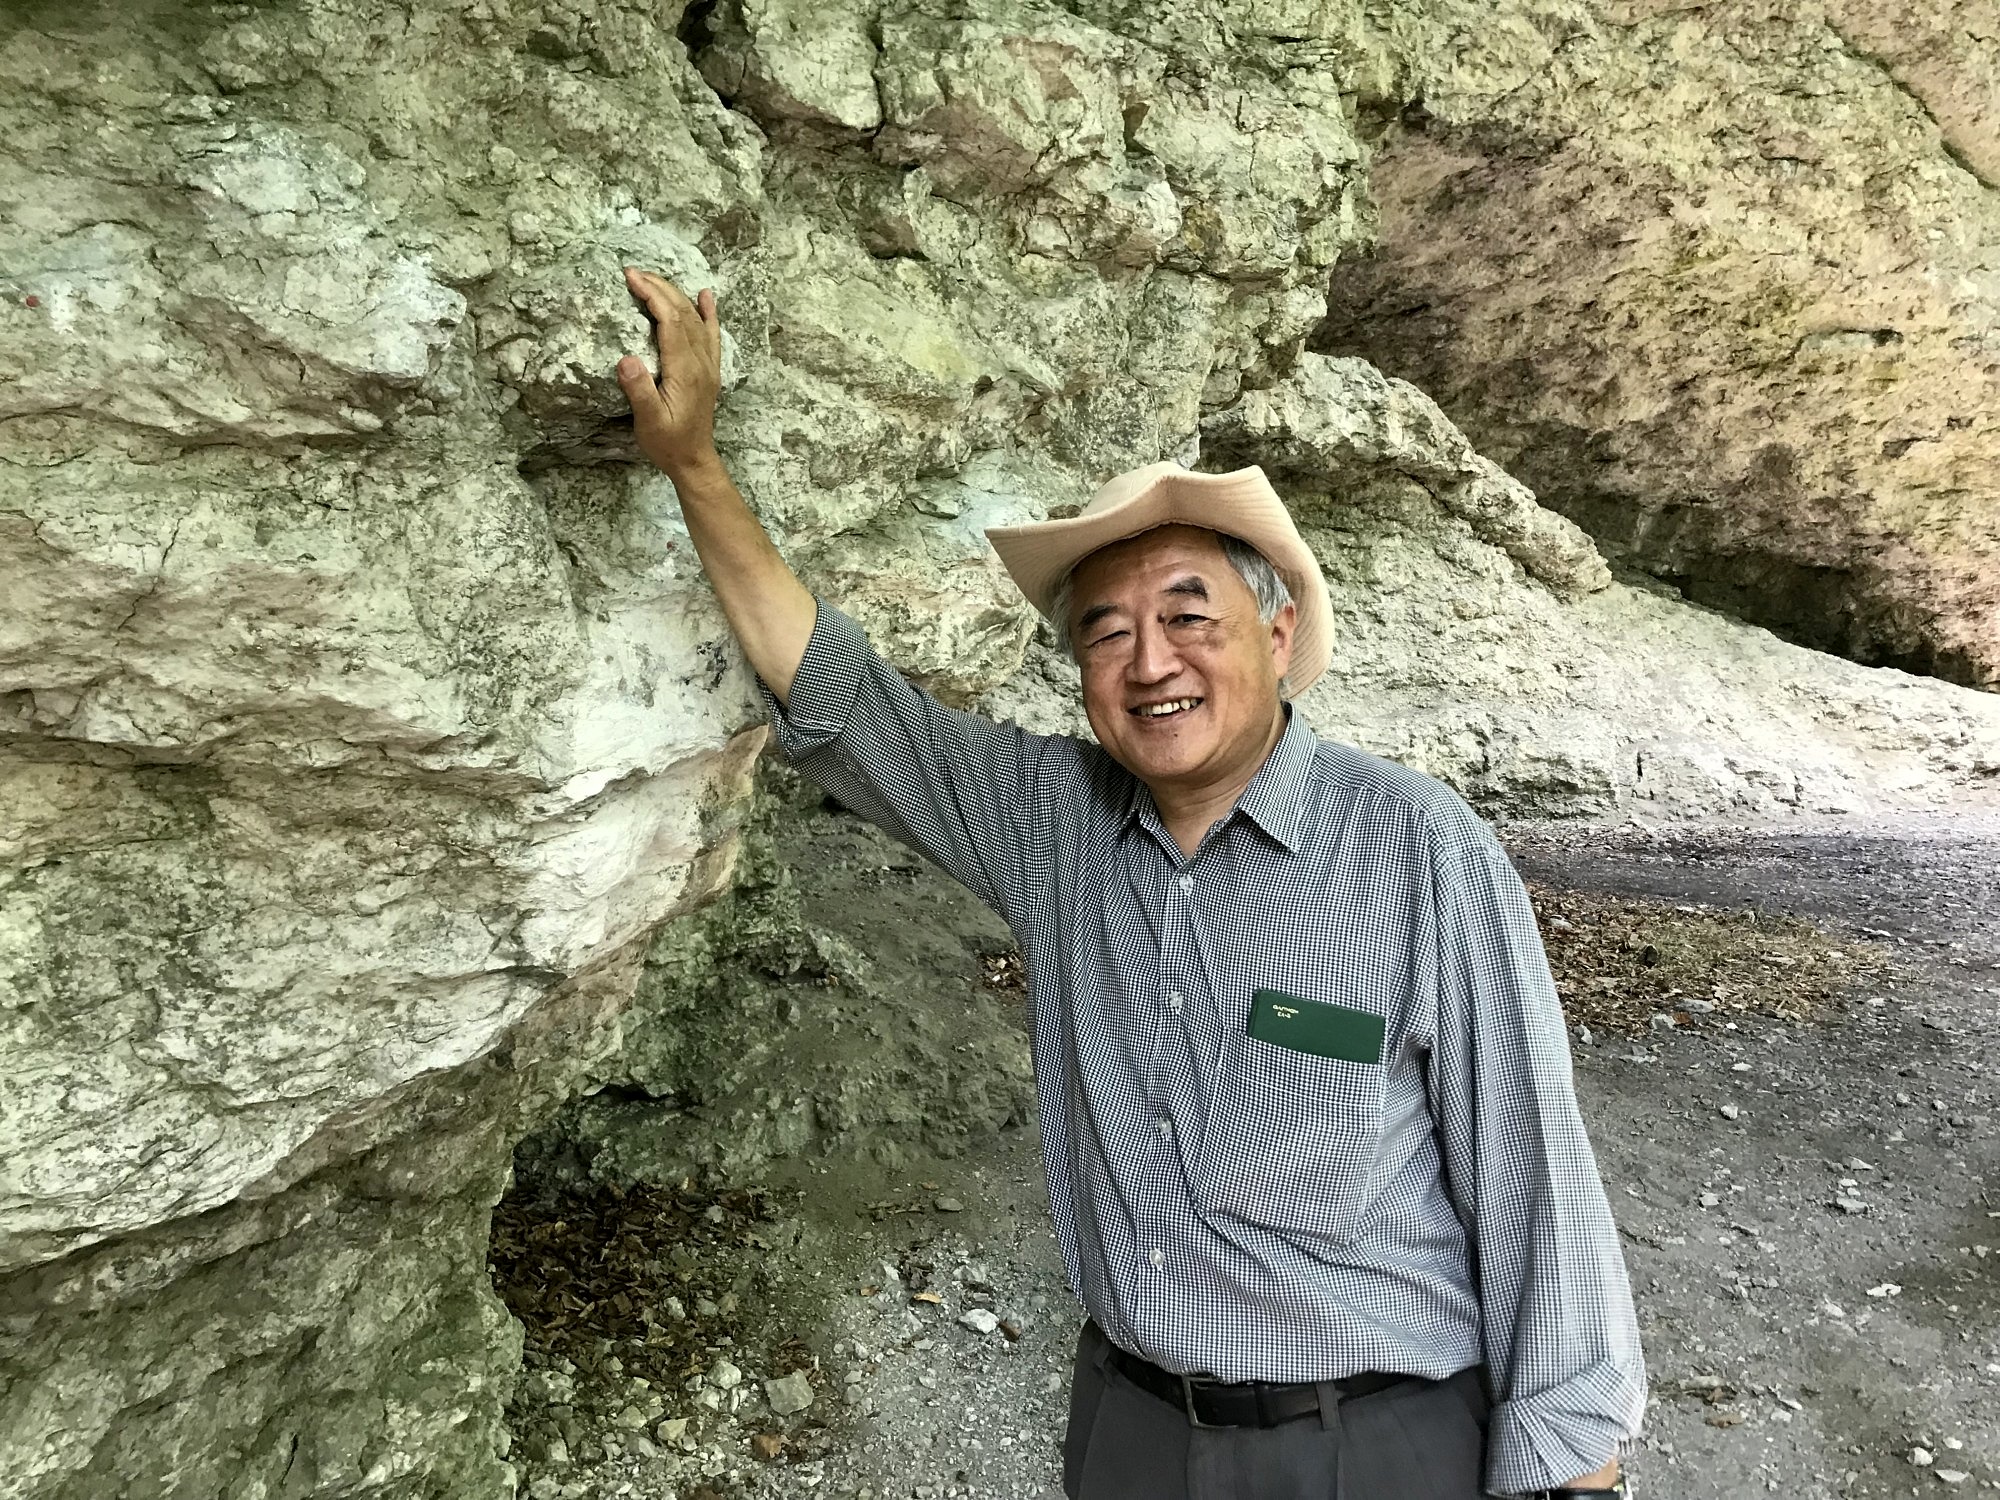 Prof. Isozaki at the Müllersfelsen, a Late Jurassic siliceous sponge - microbial reef mound in Franconia